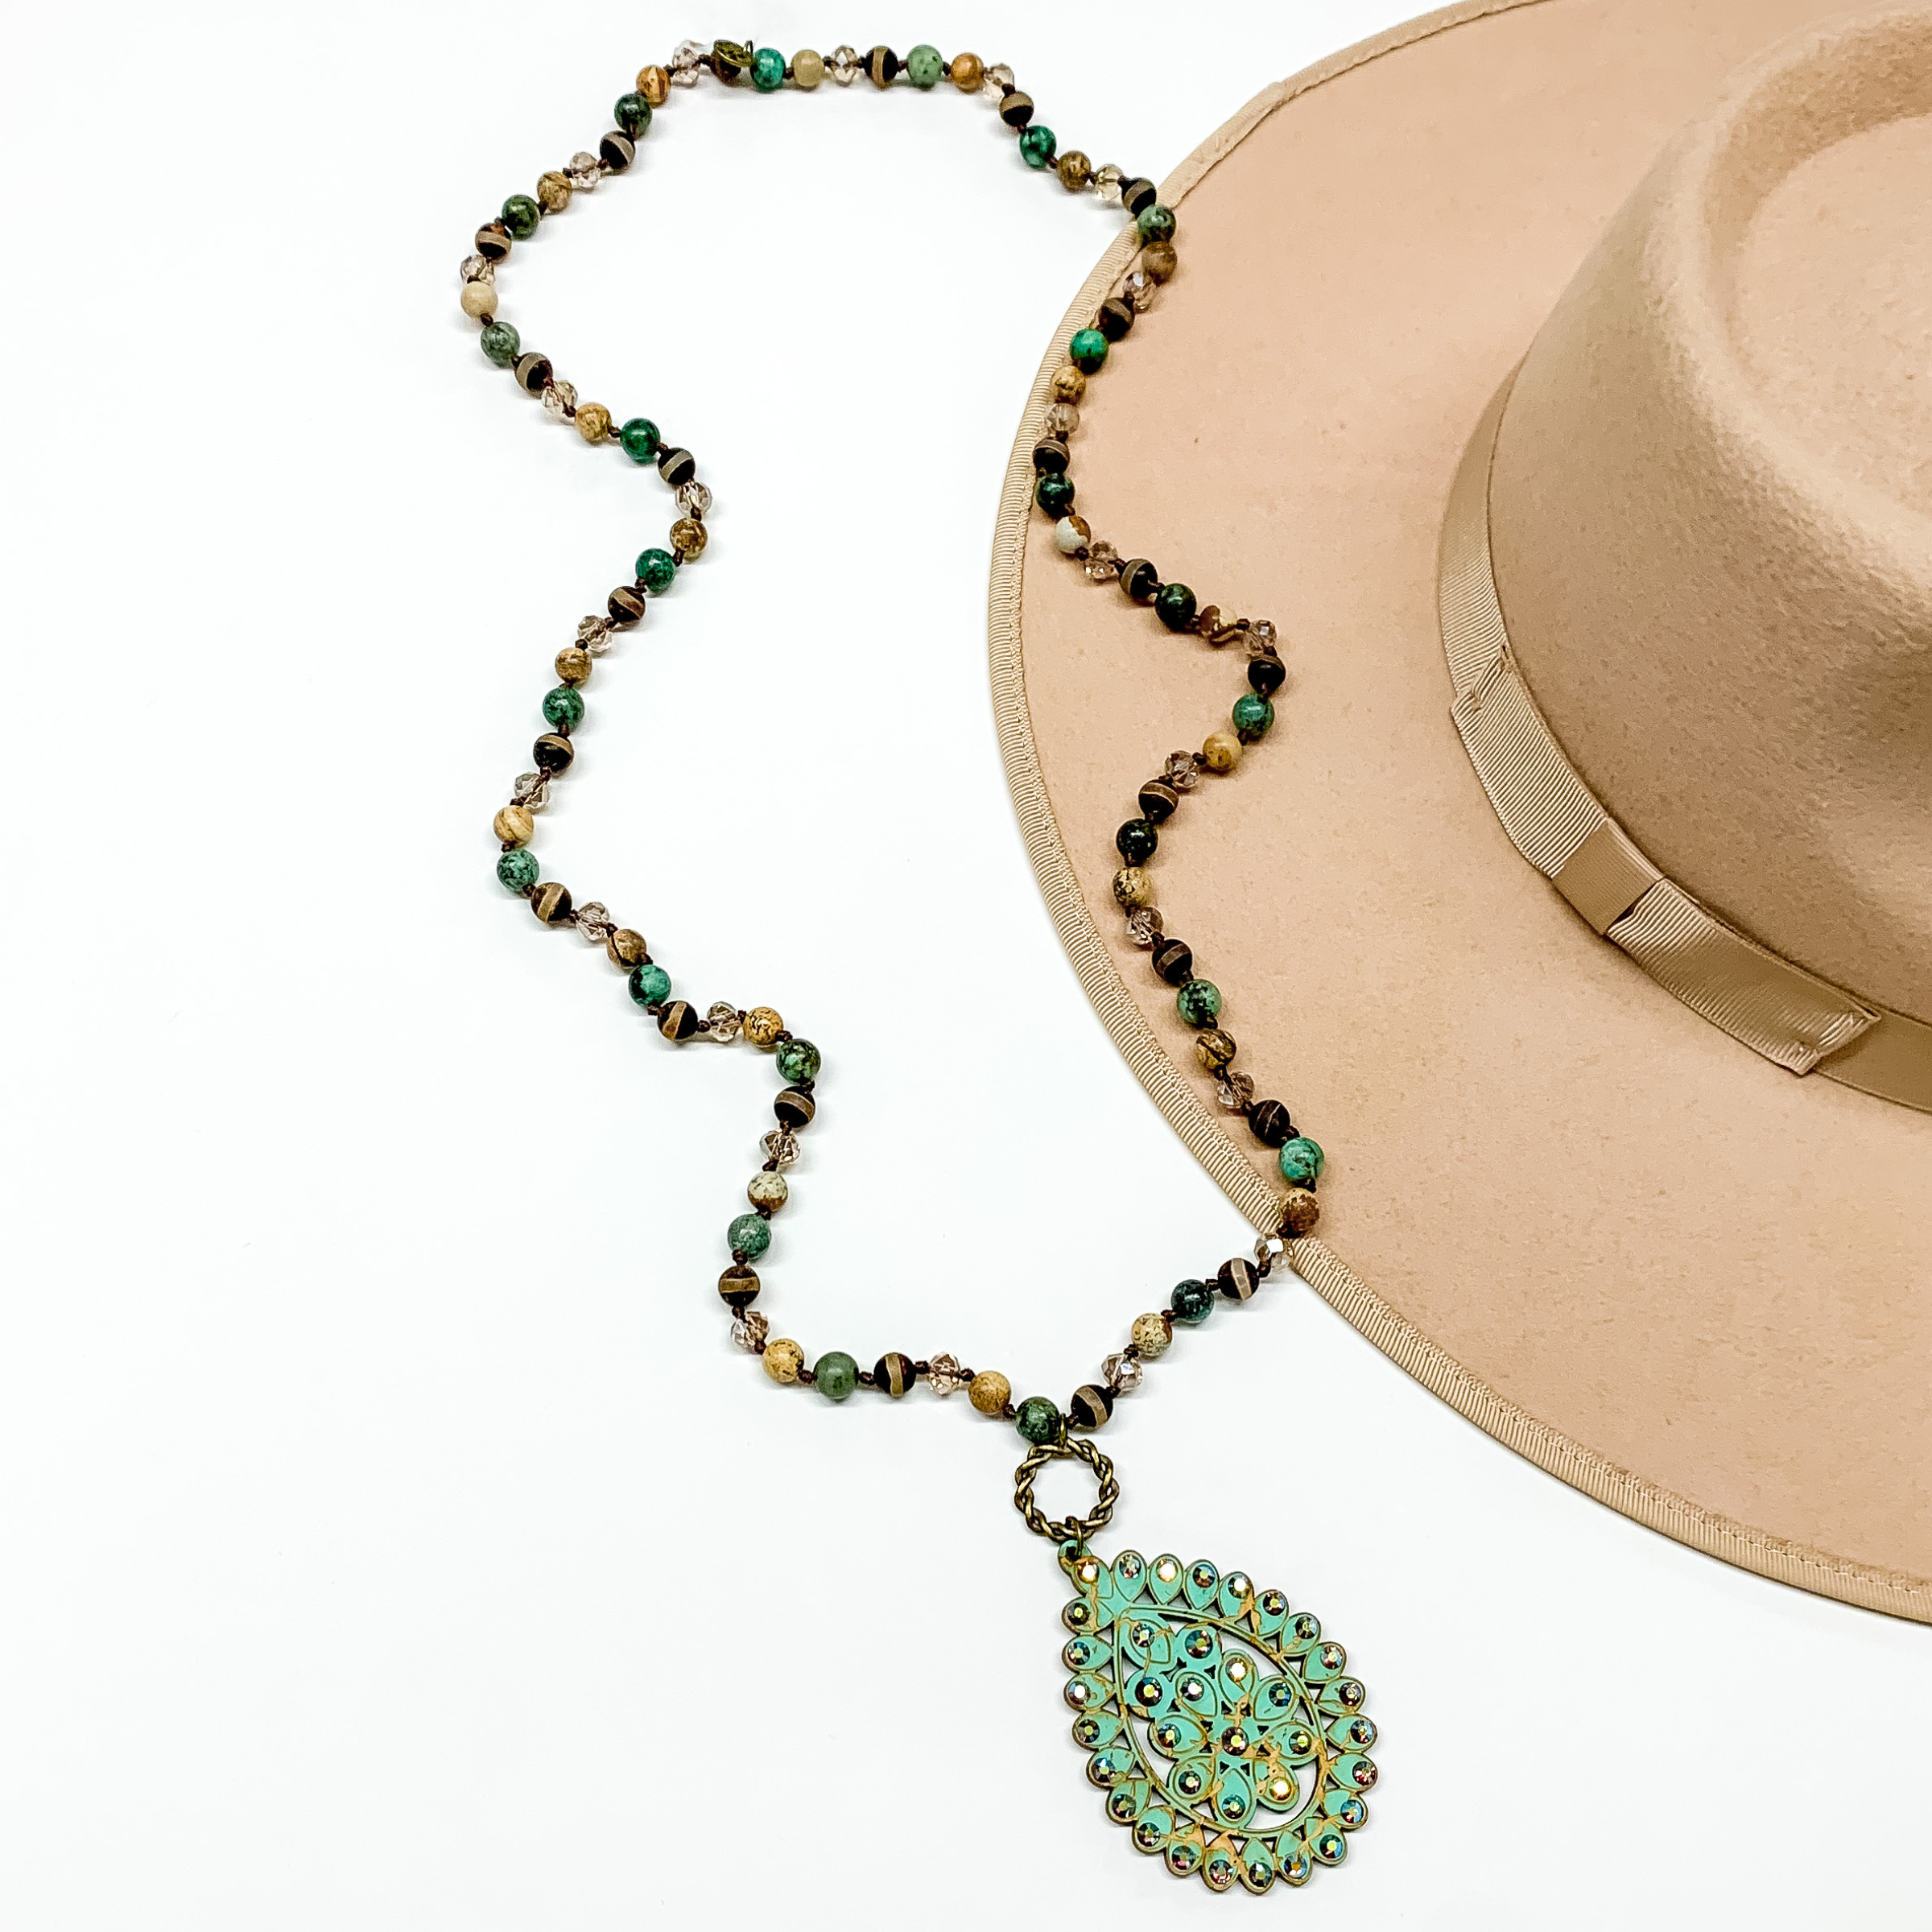 Pink Panache | Long Beaded Necklace with Santa Fe Crackle Teardrop Pendant in Turquoise with AB Crystal Outline - Giddy Up Glamour Boutique